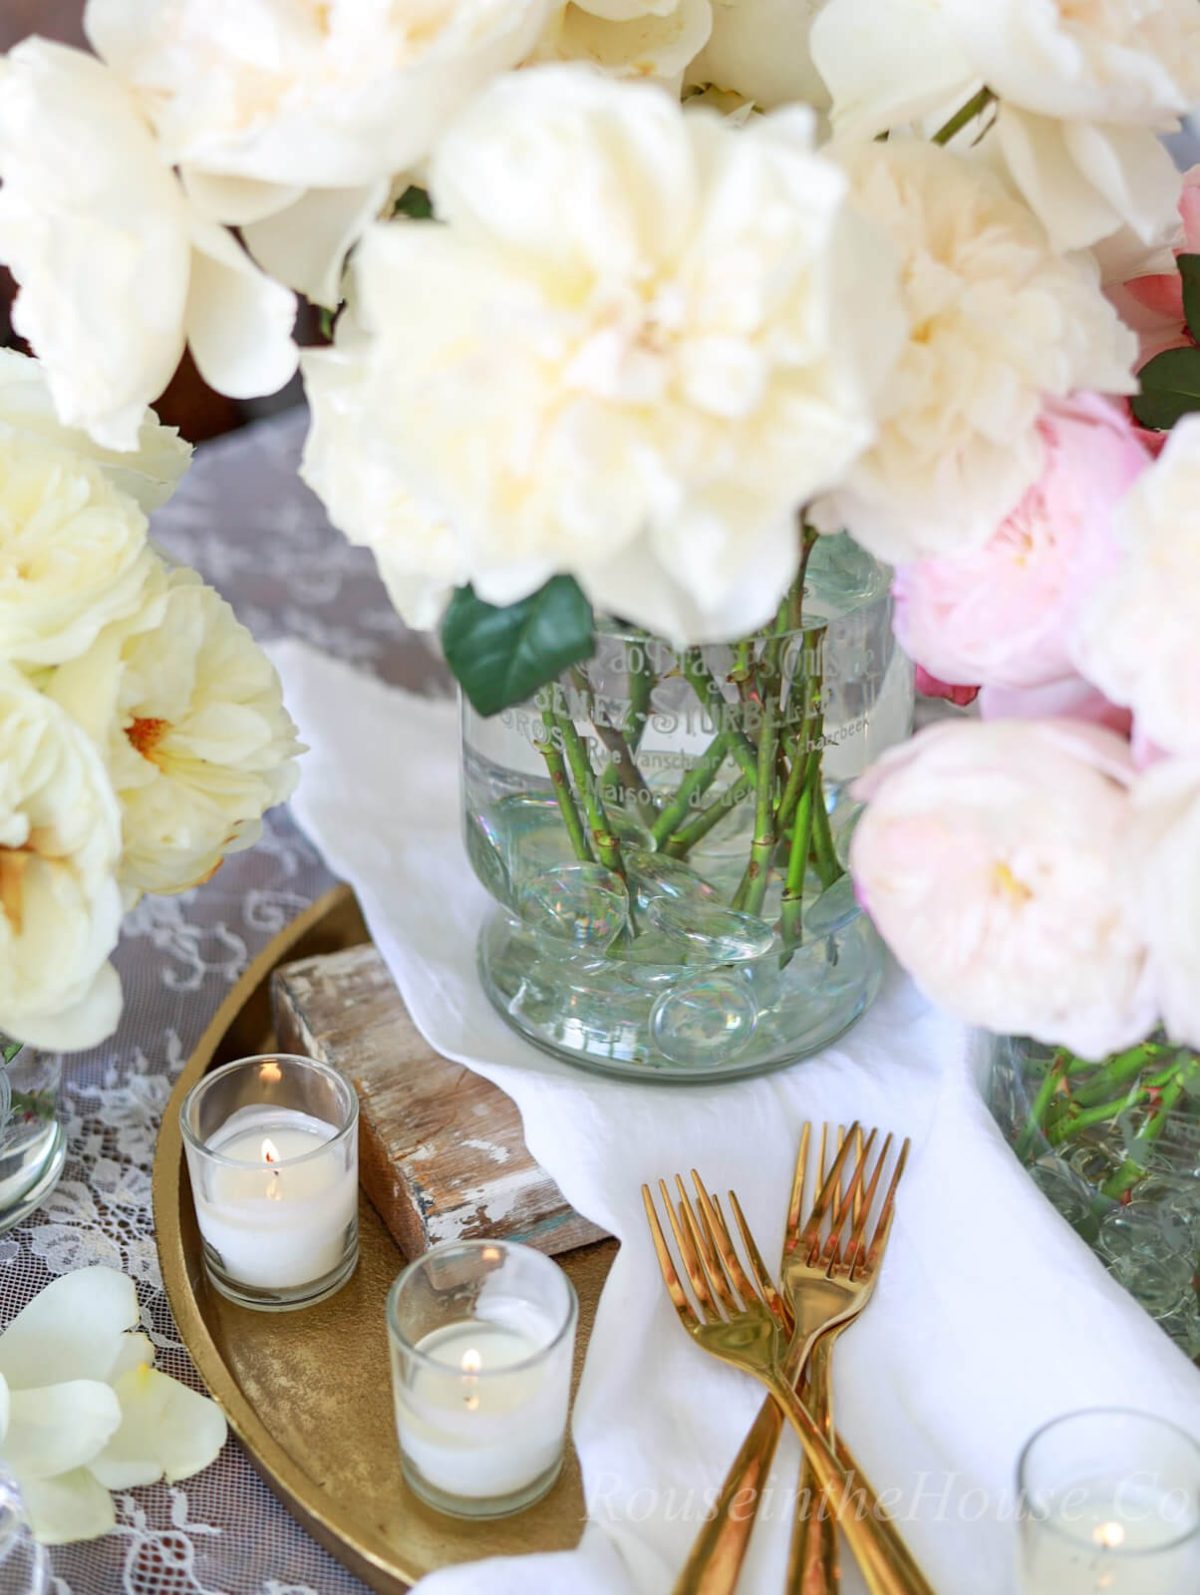 Rose arrangements in etched flower vases are gathered on a gold tray in the center of a dining table along with lit votive candles, gold flatware, and white textiles.